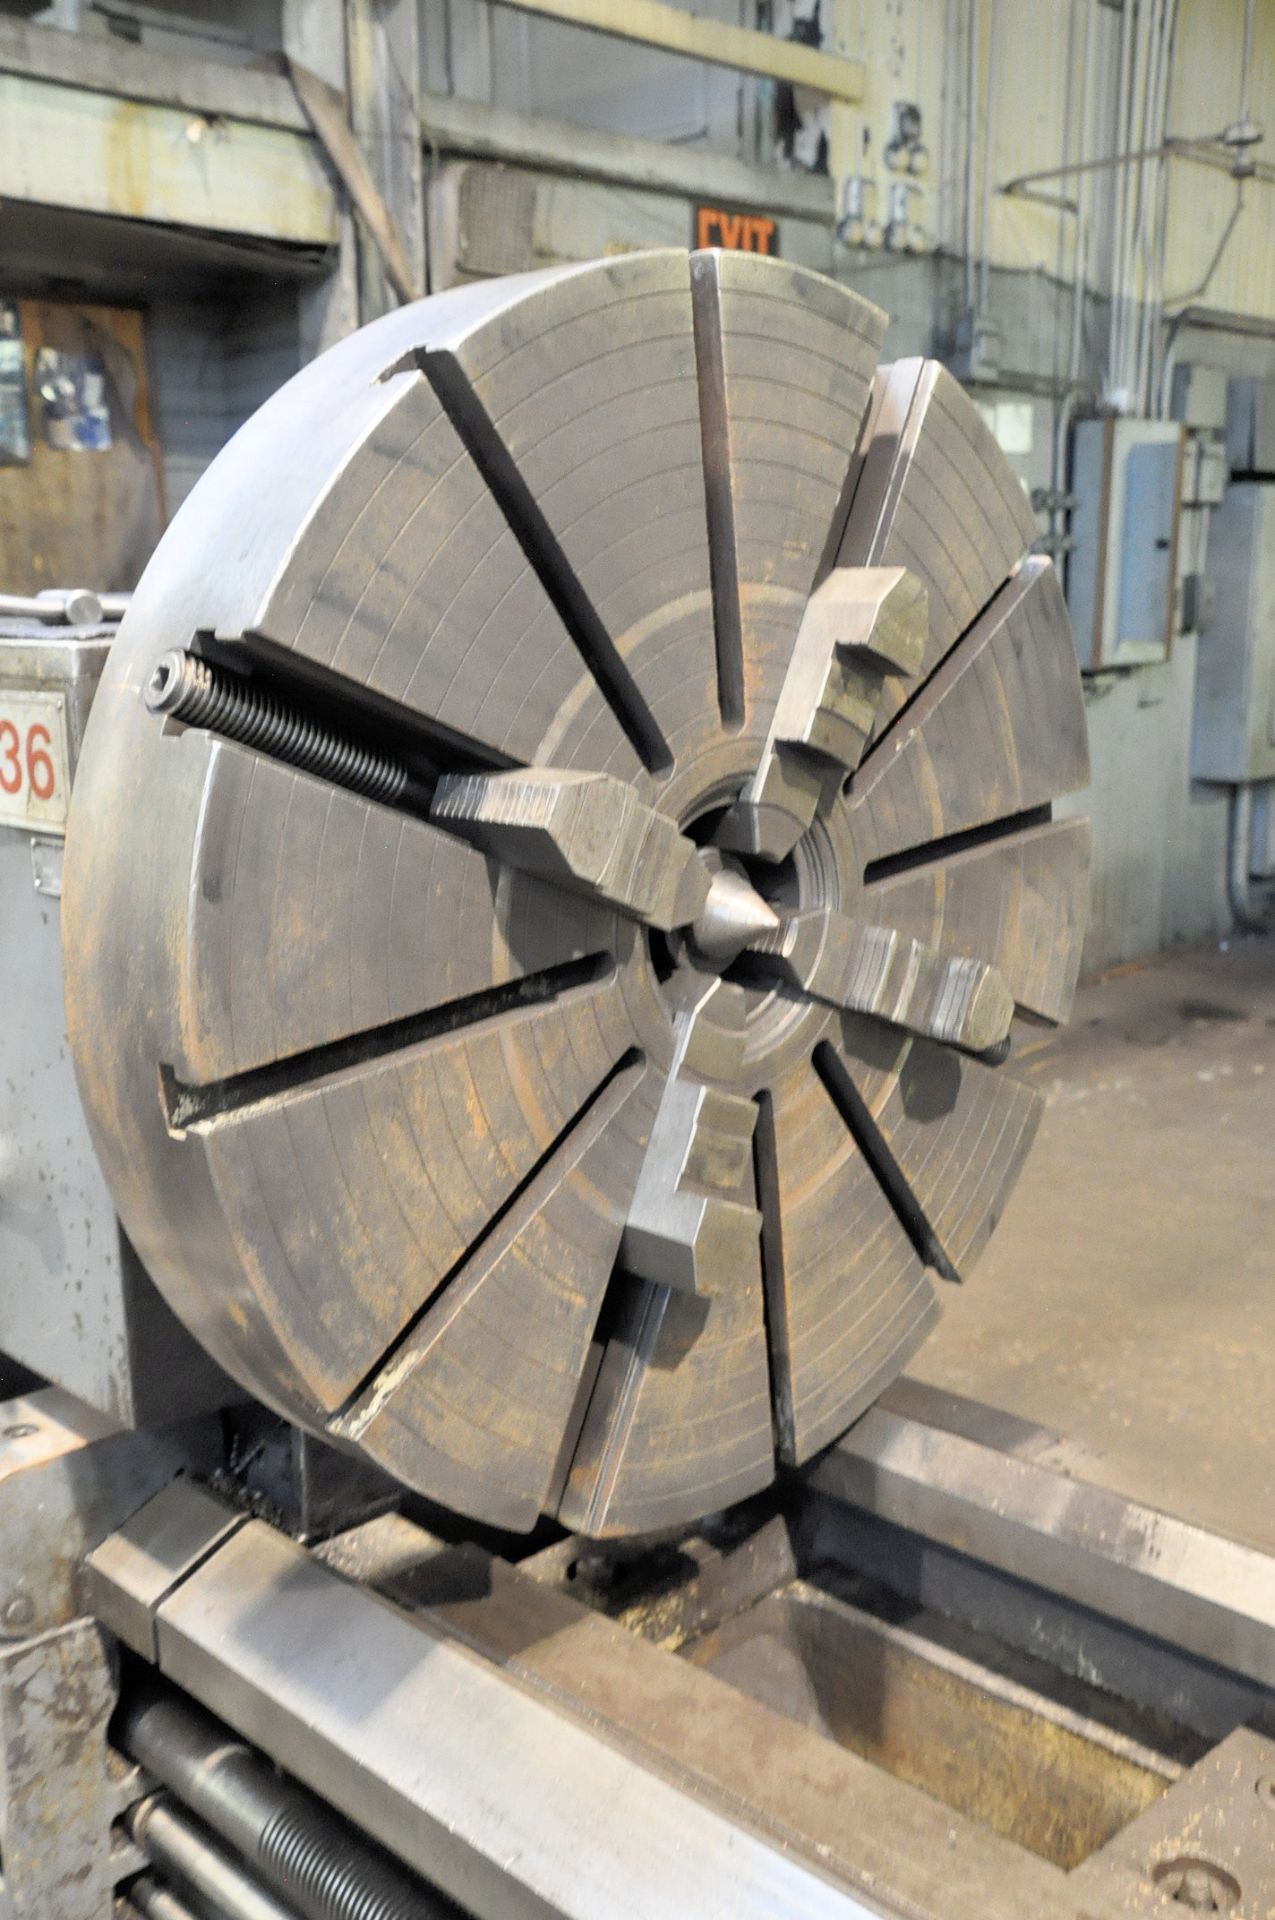 Sirco Model PA-36 36" X 240" Gap Bed Engine Lathe, S/N 511, 34" 4-Jaw Chuck, Tool post, (2) Steady - Image 3 of 9